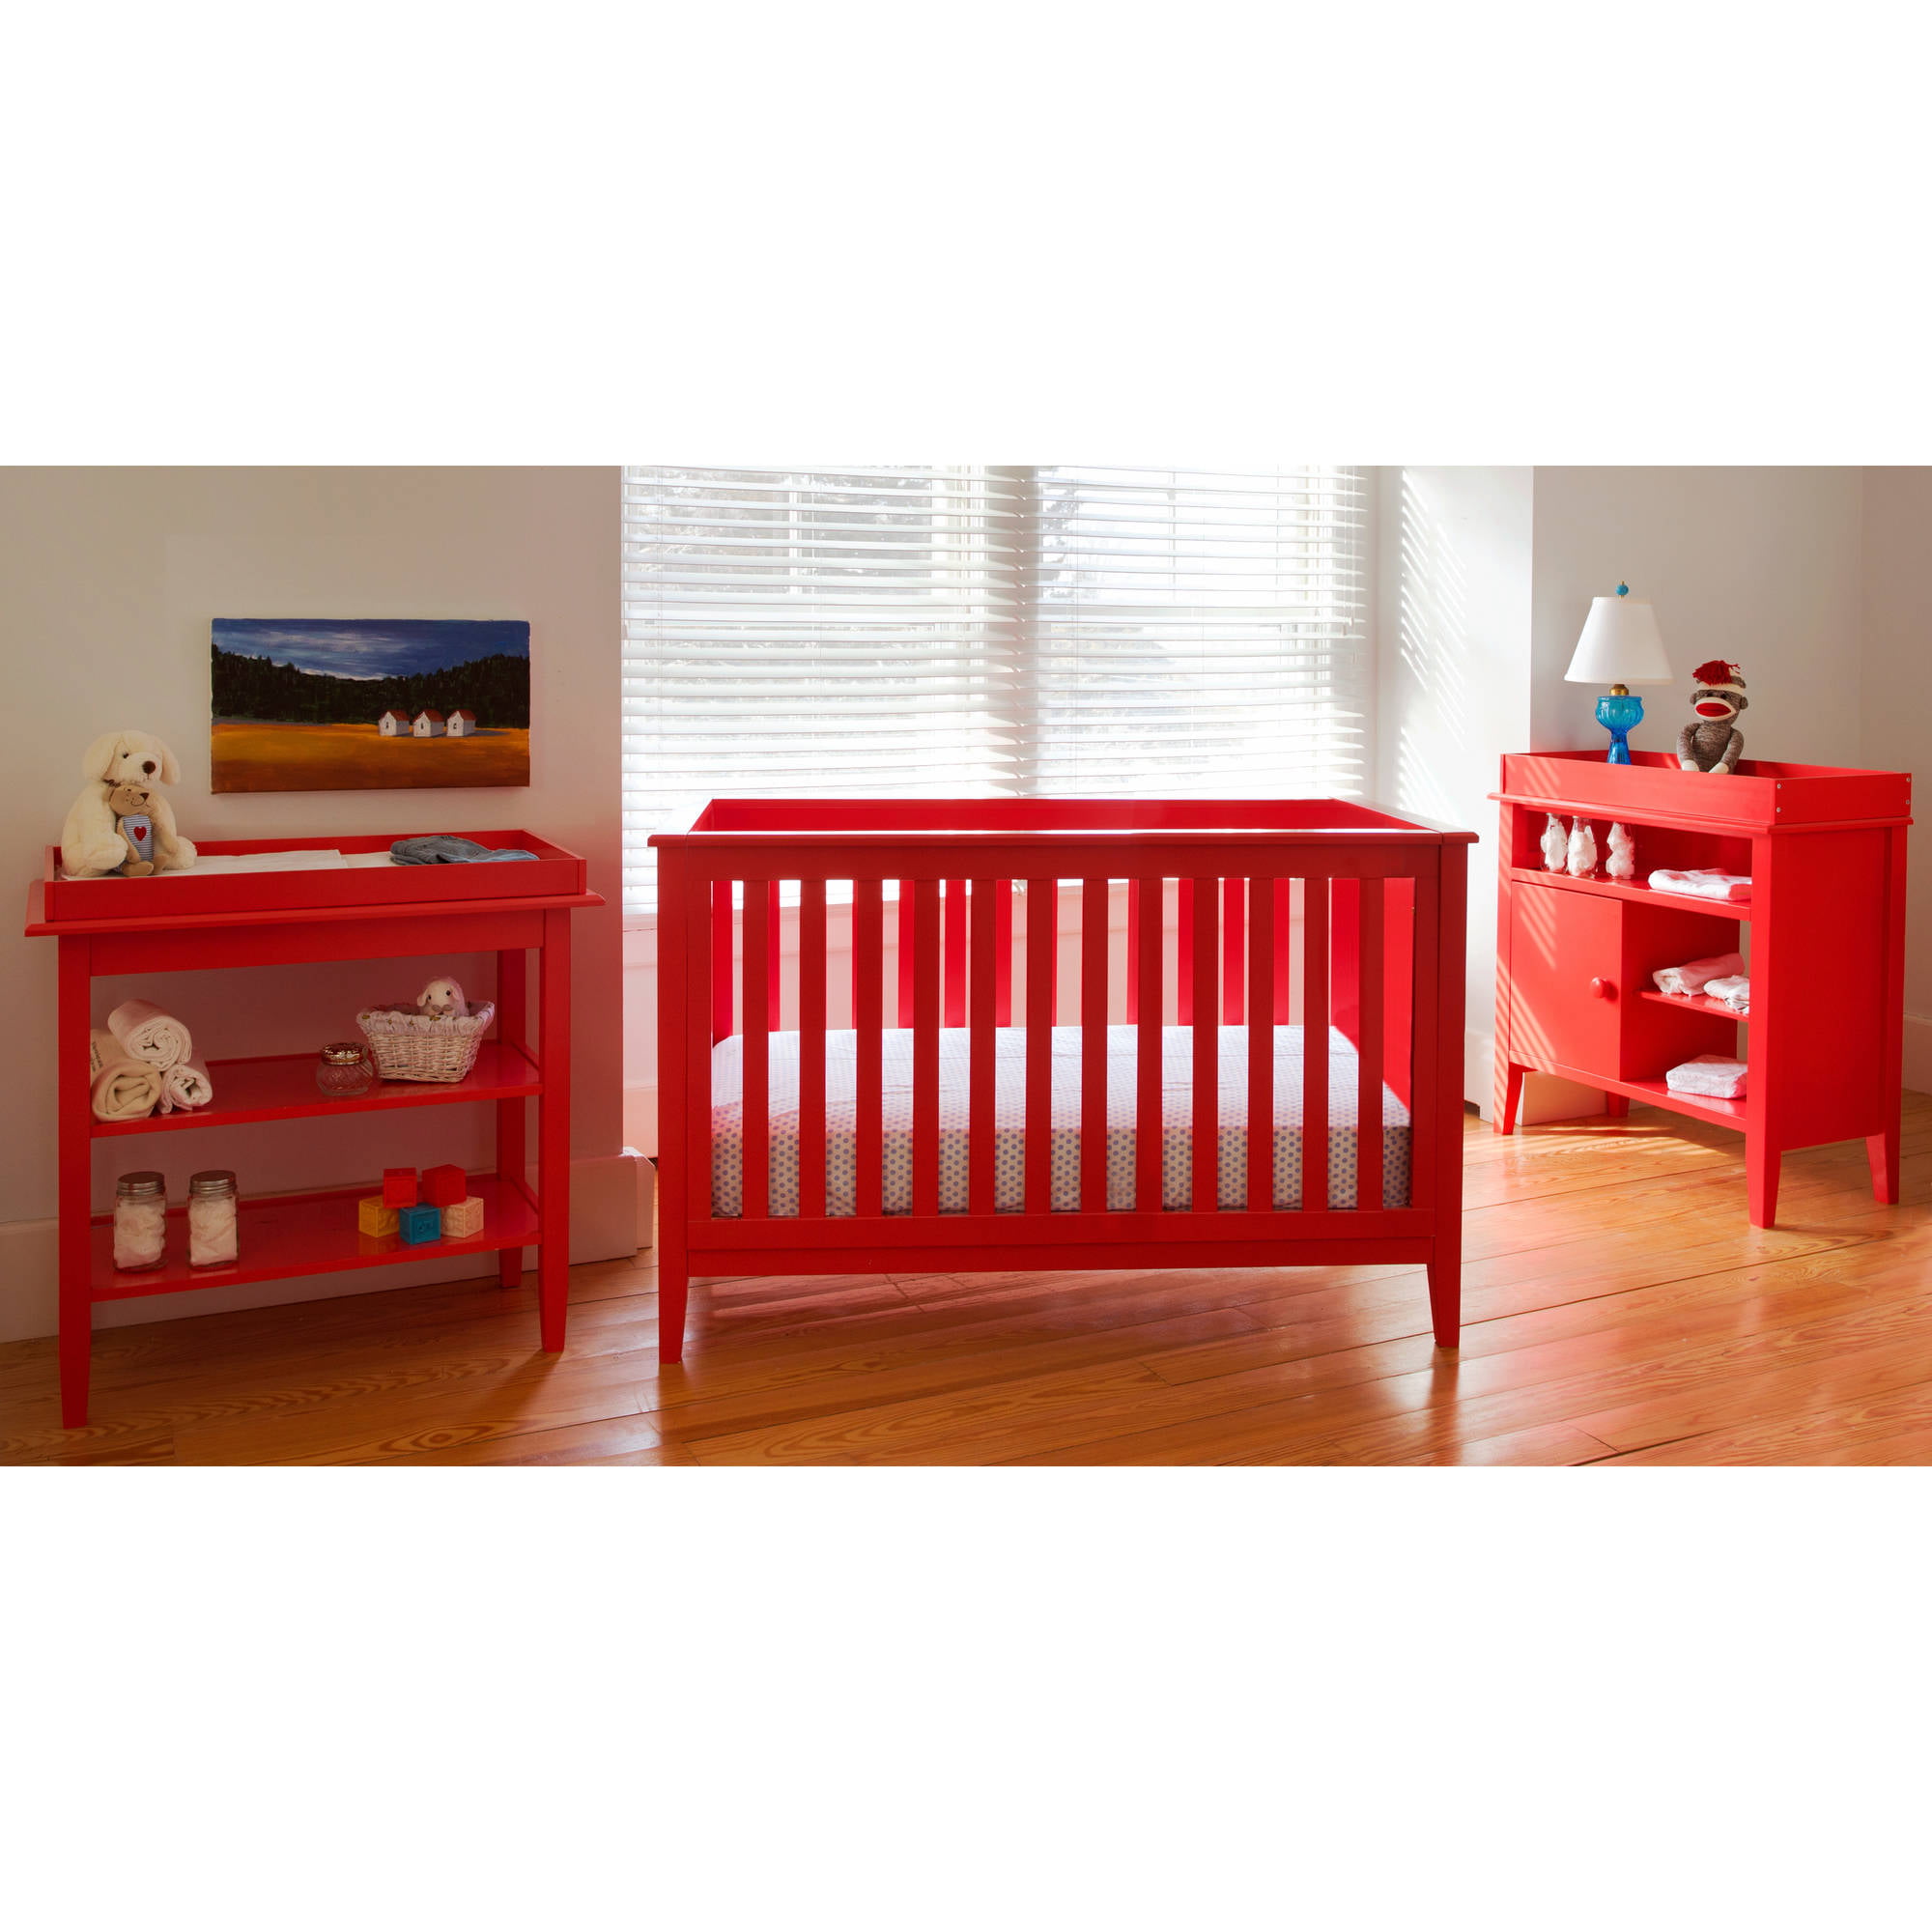 Me 3-in-1 Convertible Crib Lollipop Red 